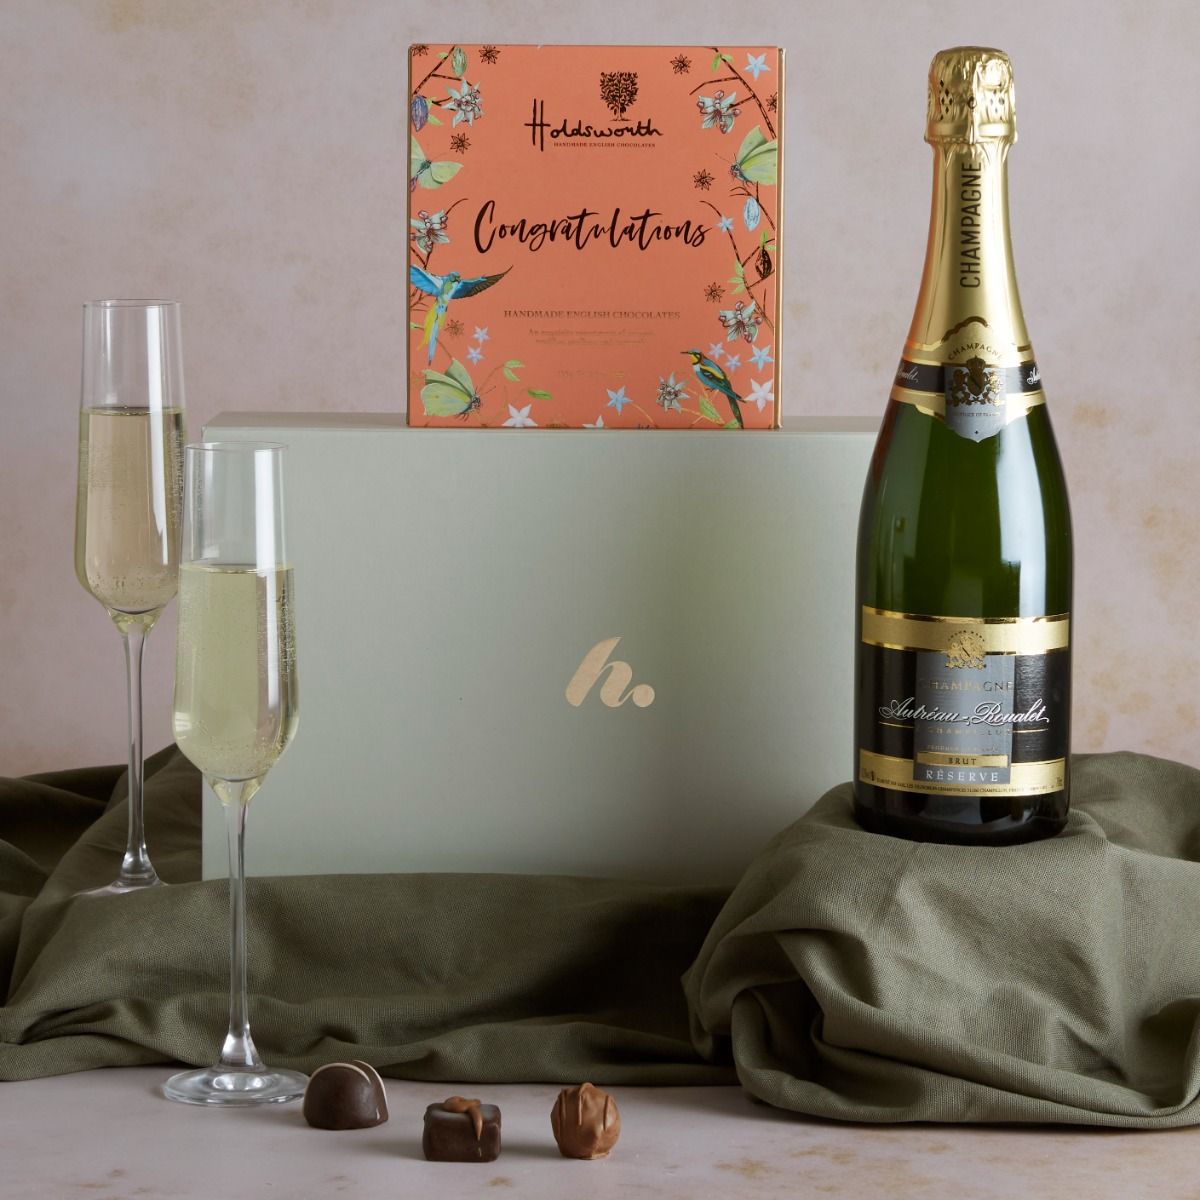 Congratulations Champagne & Chocolates Gift with contents on display